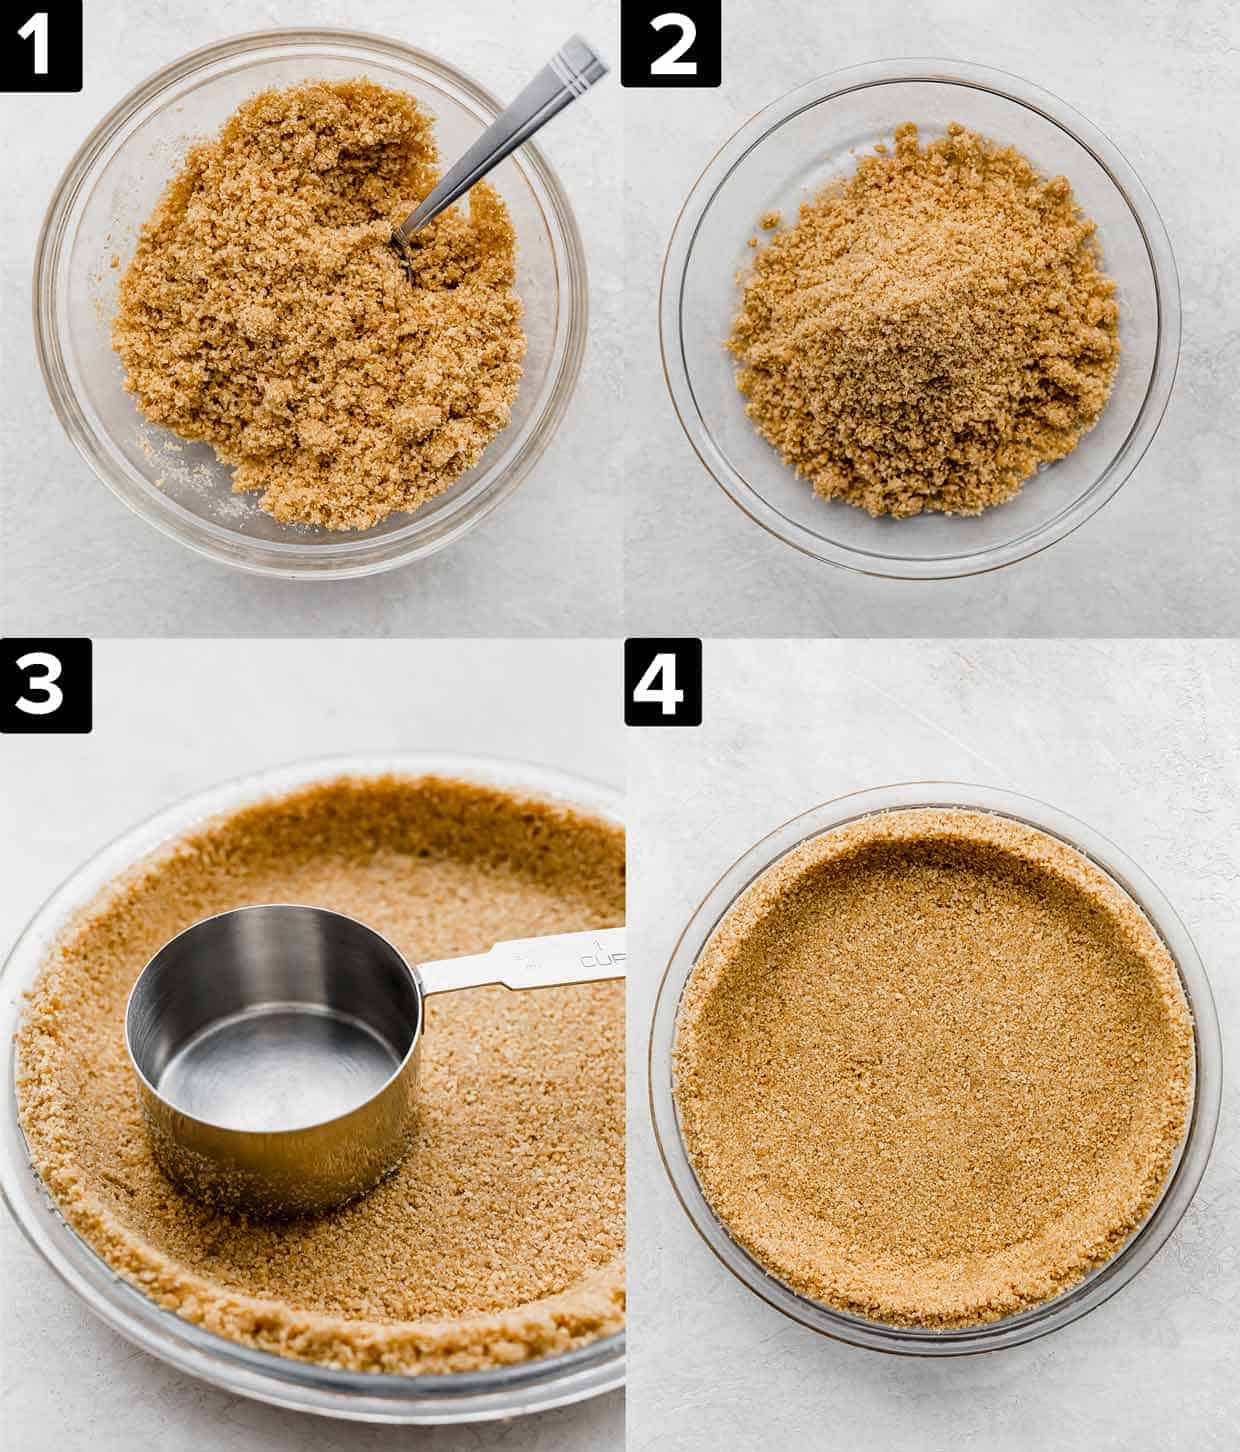 Four images illustrating how to make Graham Cracker Crust recipe: graham cracker mixture in a glass bowl, graham cracker mixture in a pie plate, a metal measuring cup pressing into the crust, and baked pie crust.